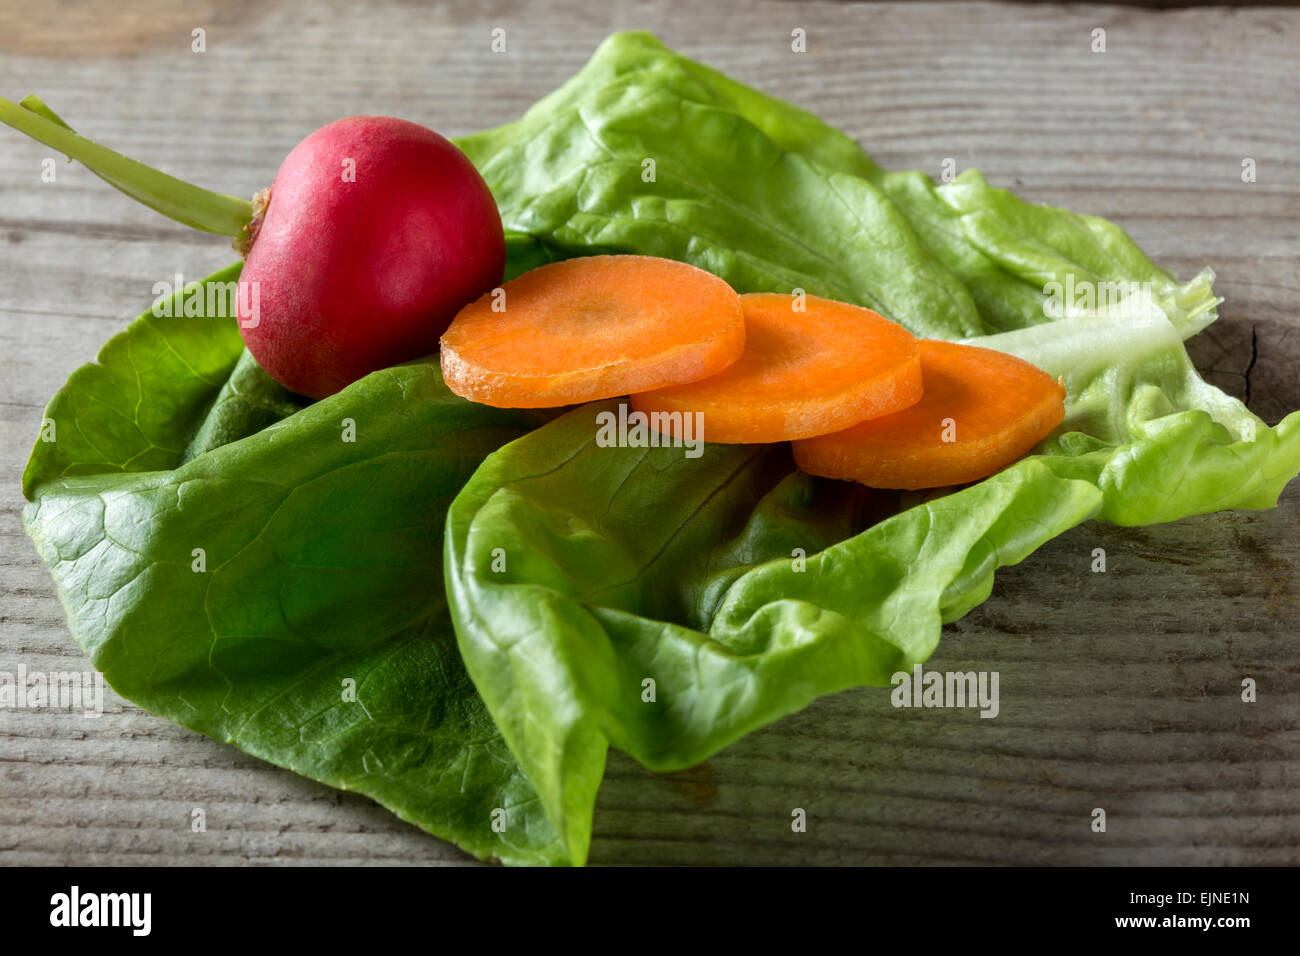 Close up shot of radish and sliced carrots on a salad leaf over wooden background Stock Photo